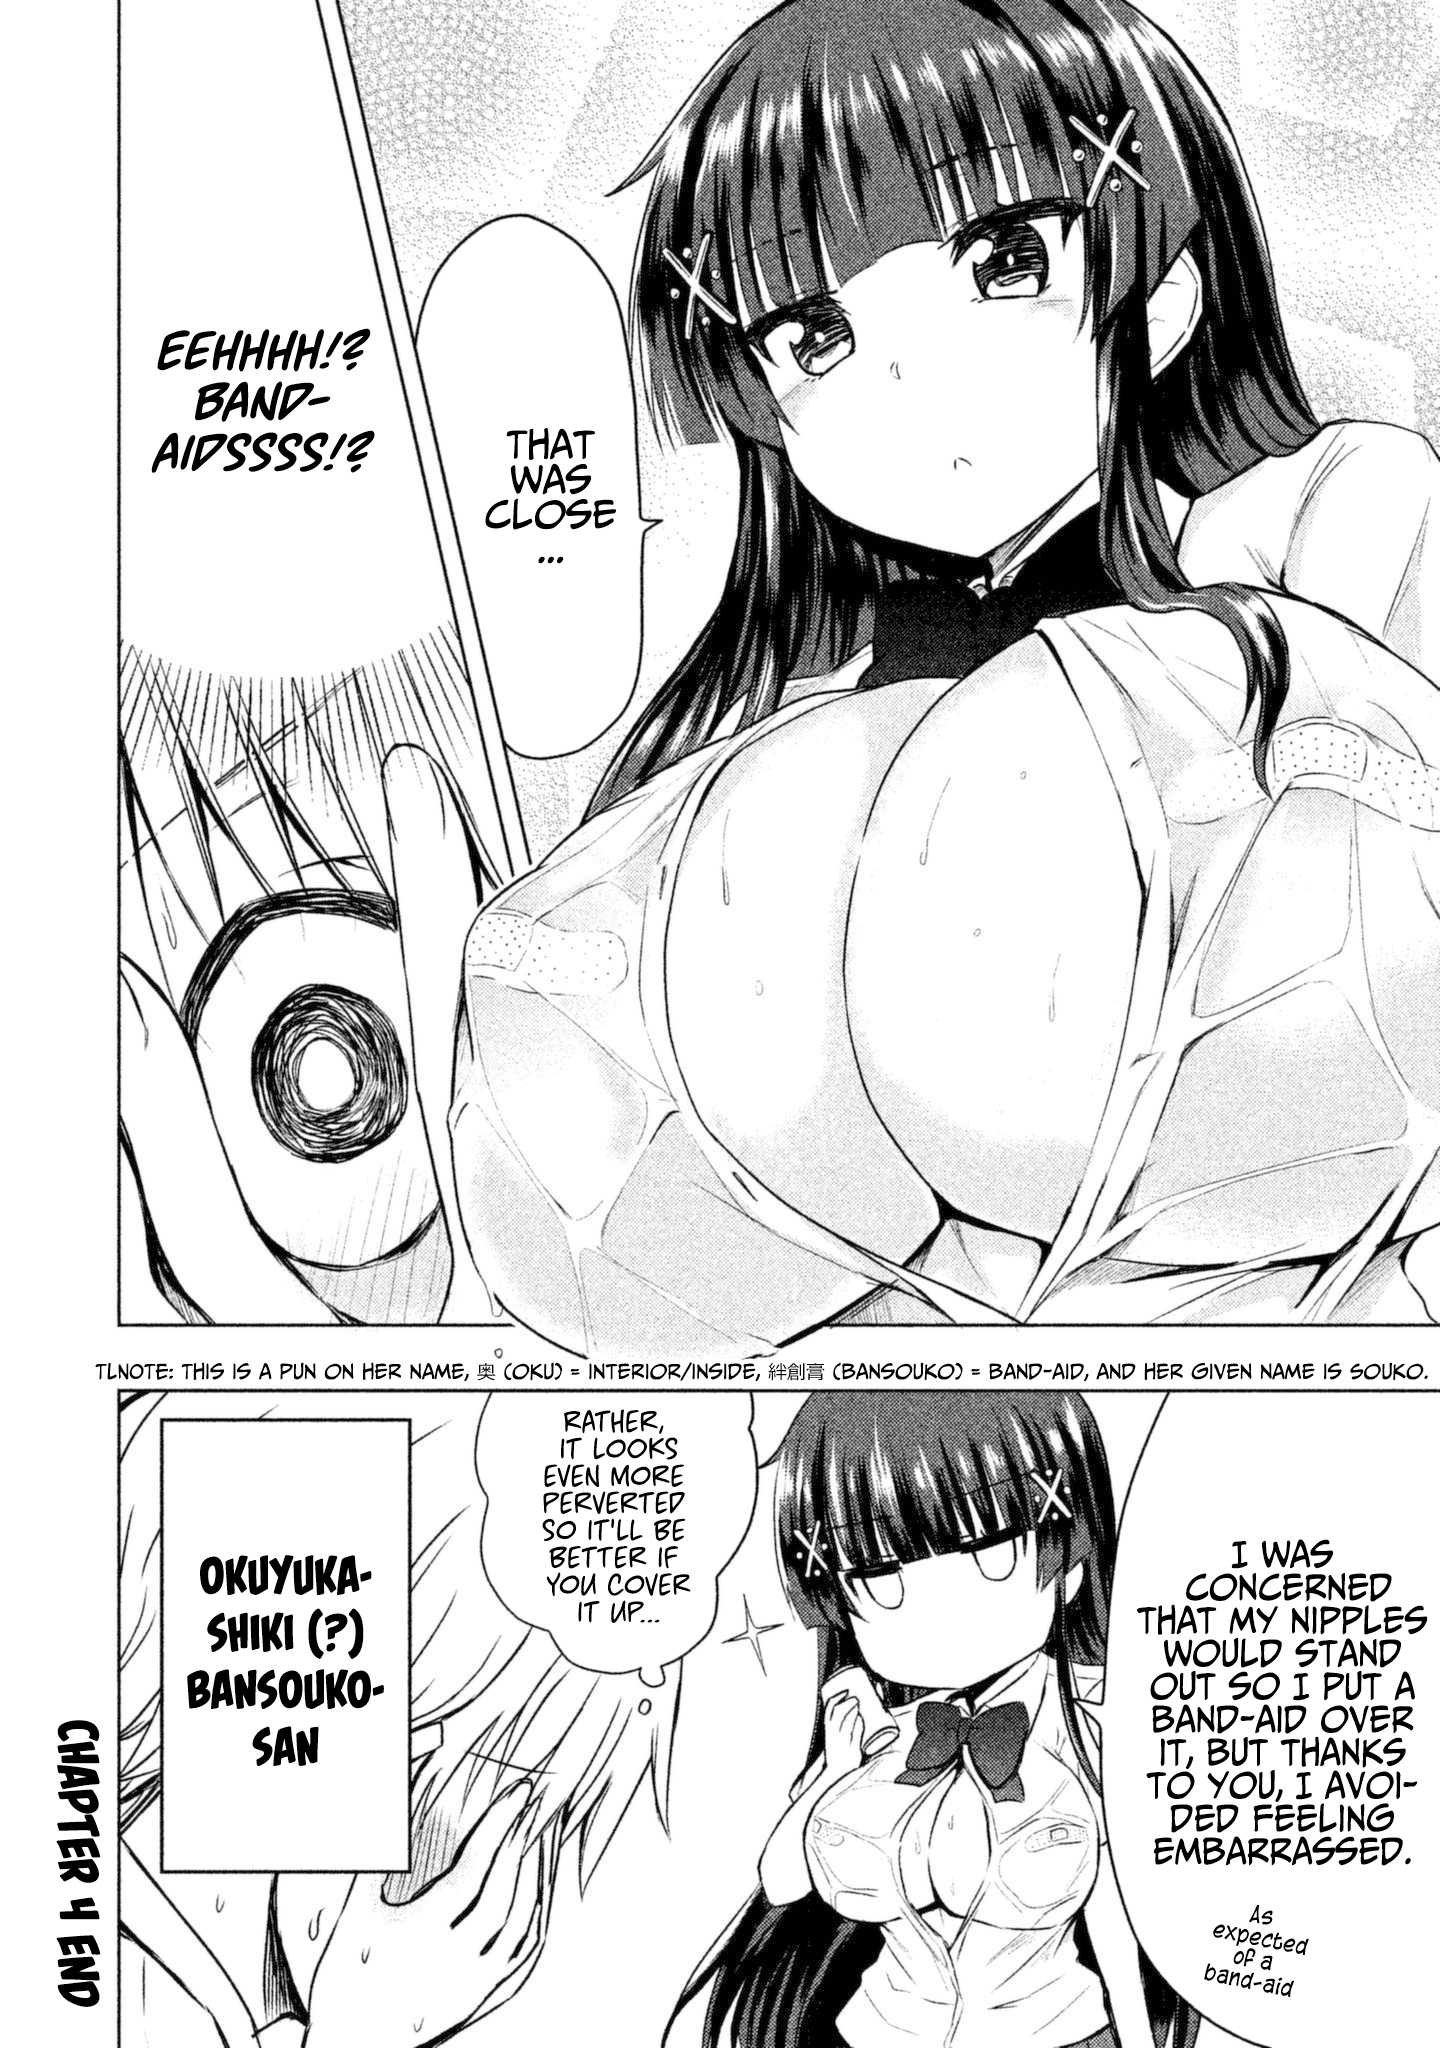 A Girl Who Is Very Well-Informed About Weird Knowledge, Takayukashiki Souko-San Chapter 4 #9